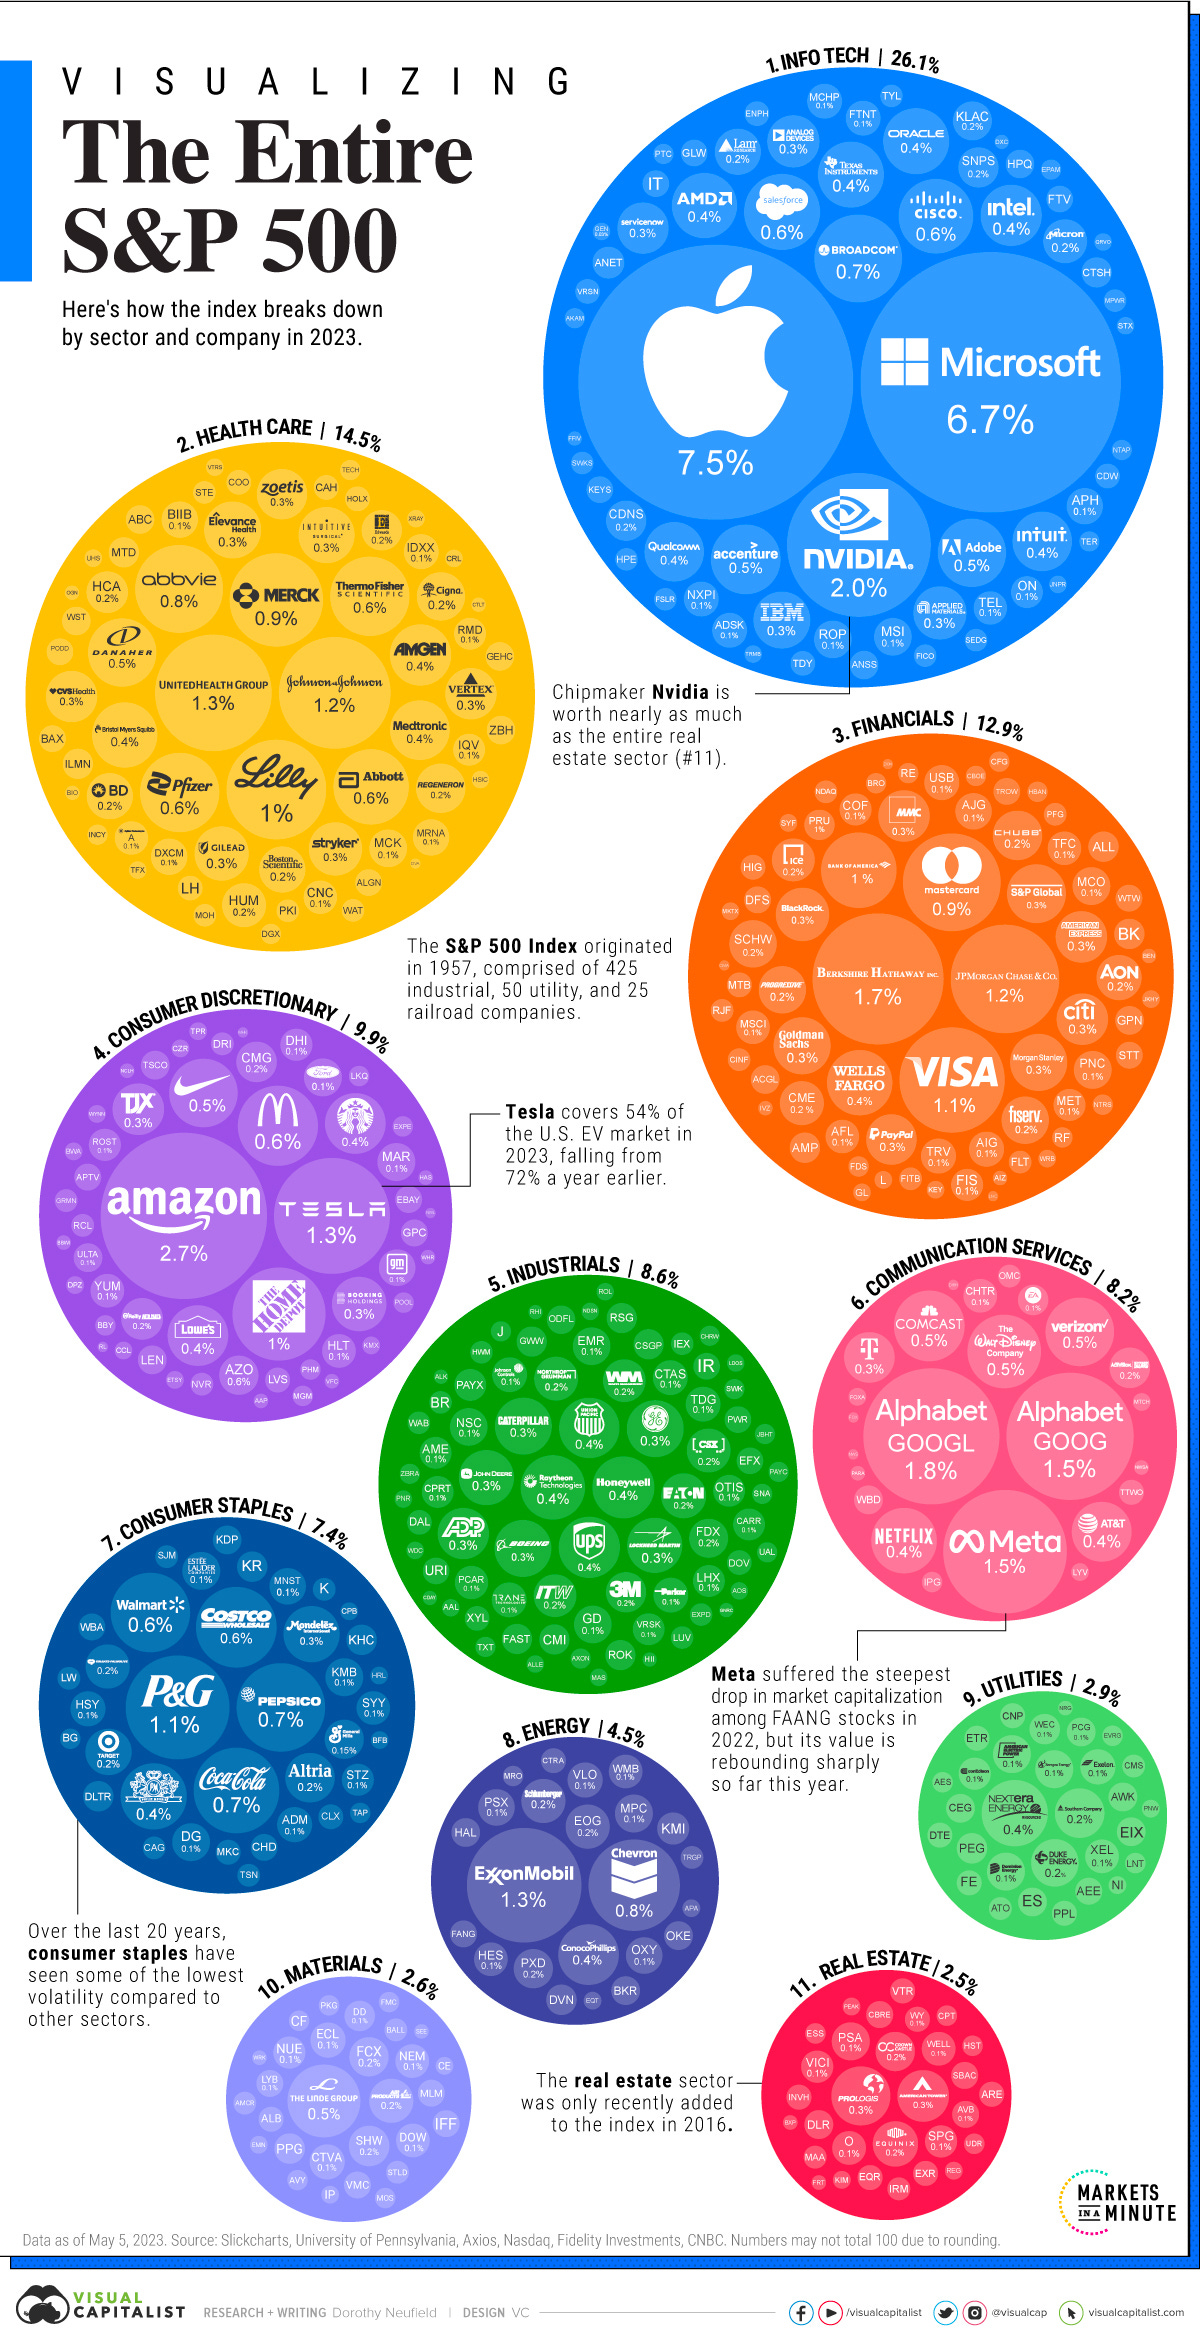 Bubble chart showing all of the S&P 500 companies in 2023, organized by sector and sized by their weighting in the index.